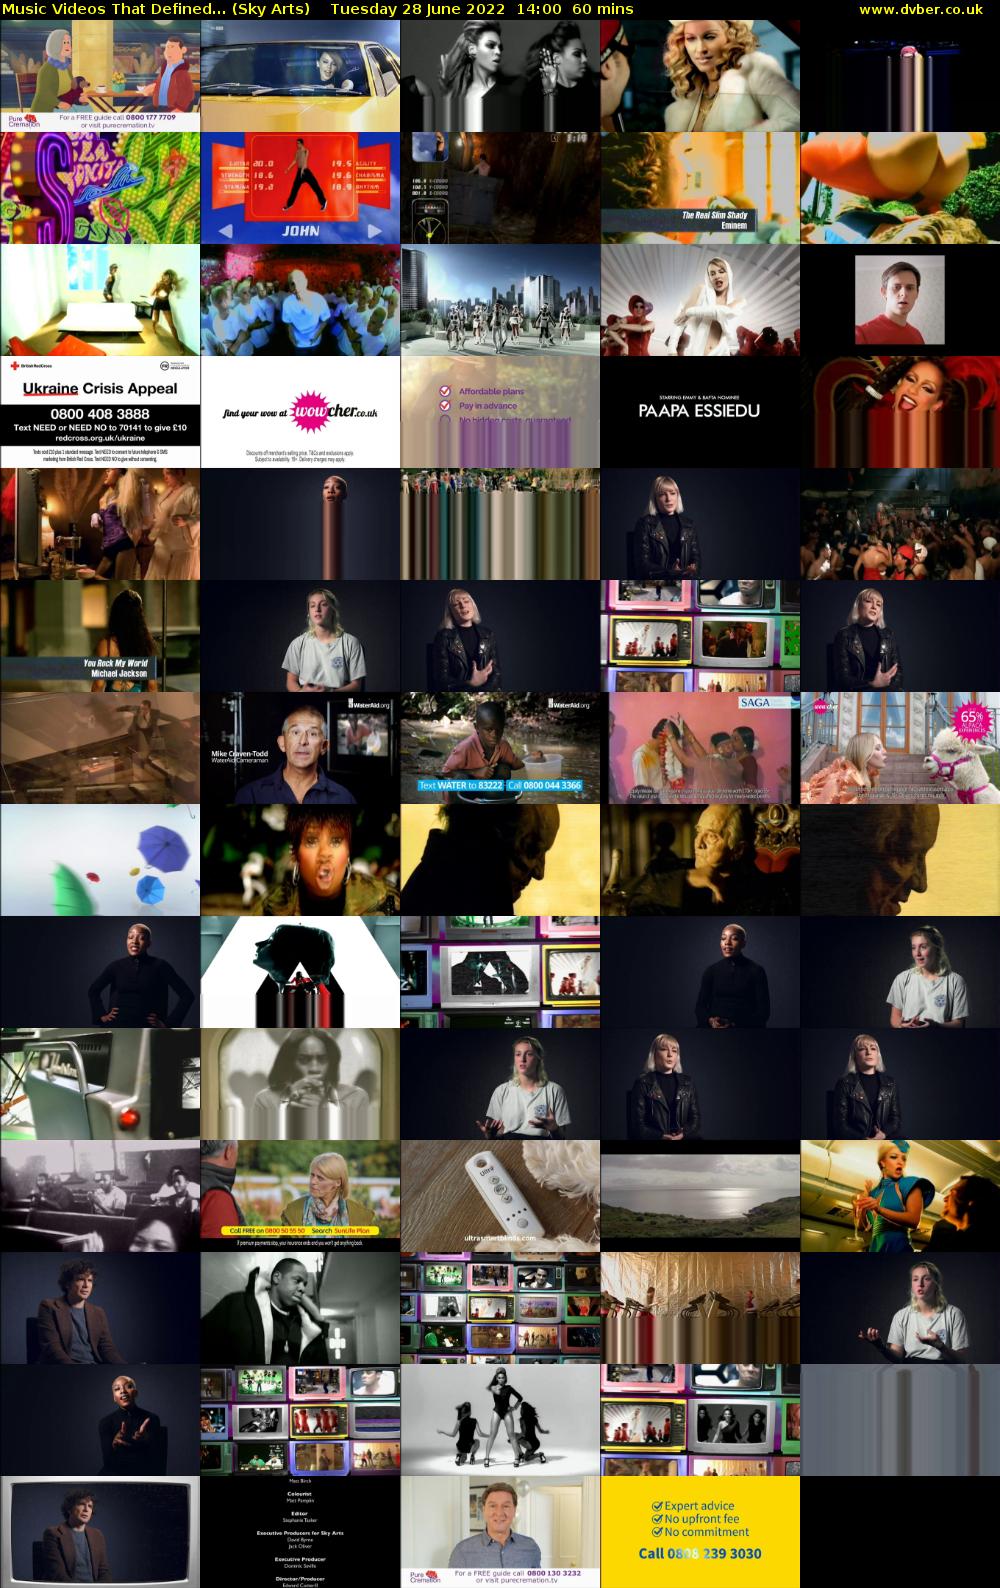 Music Videos That Defined... (Sky Arts) Tuesday 28 June 2022 14:00 - 15:00